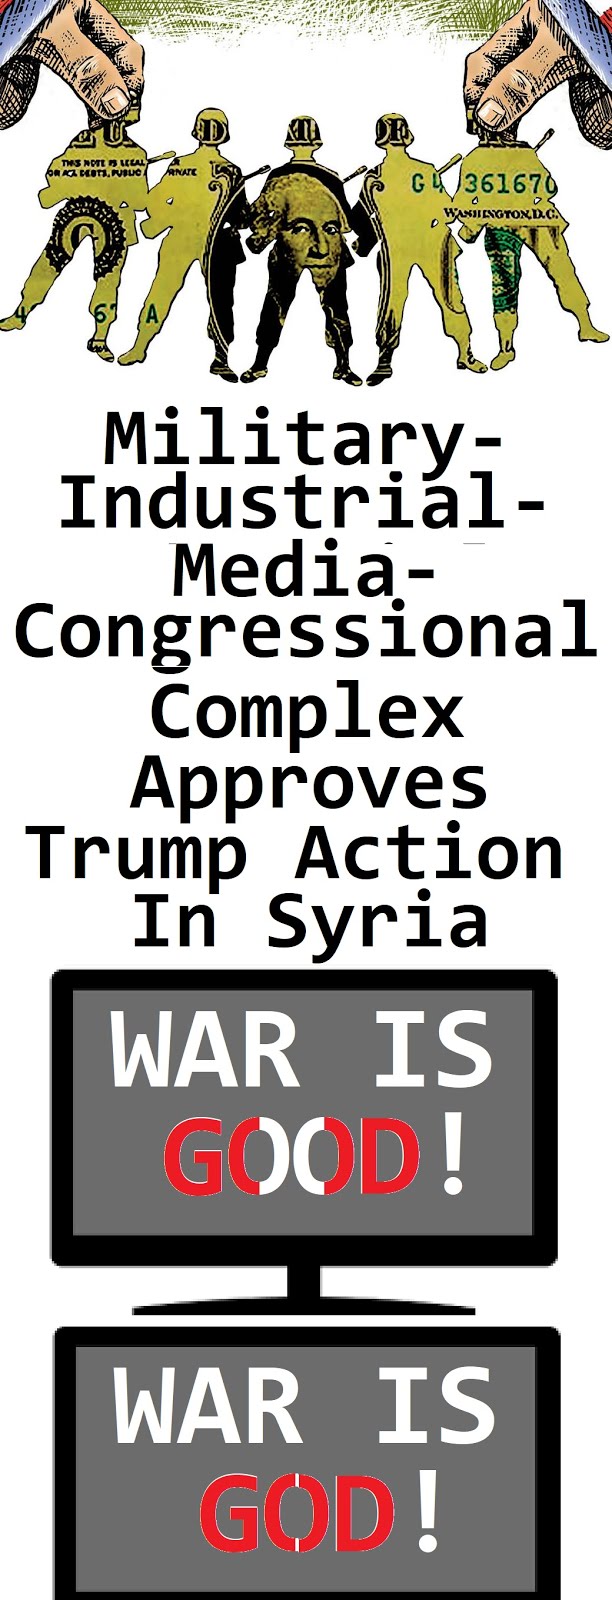 Military-Industrial-Media-Congressional Complex Approves Trump Action in Syria